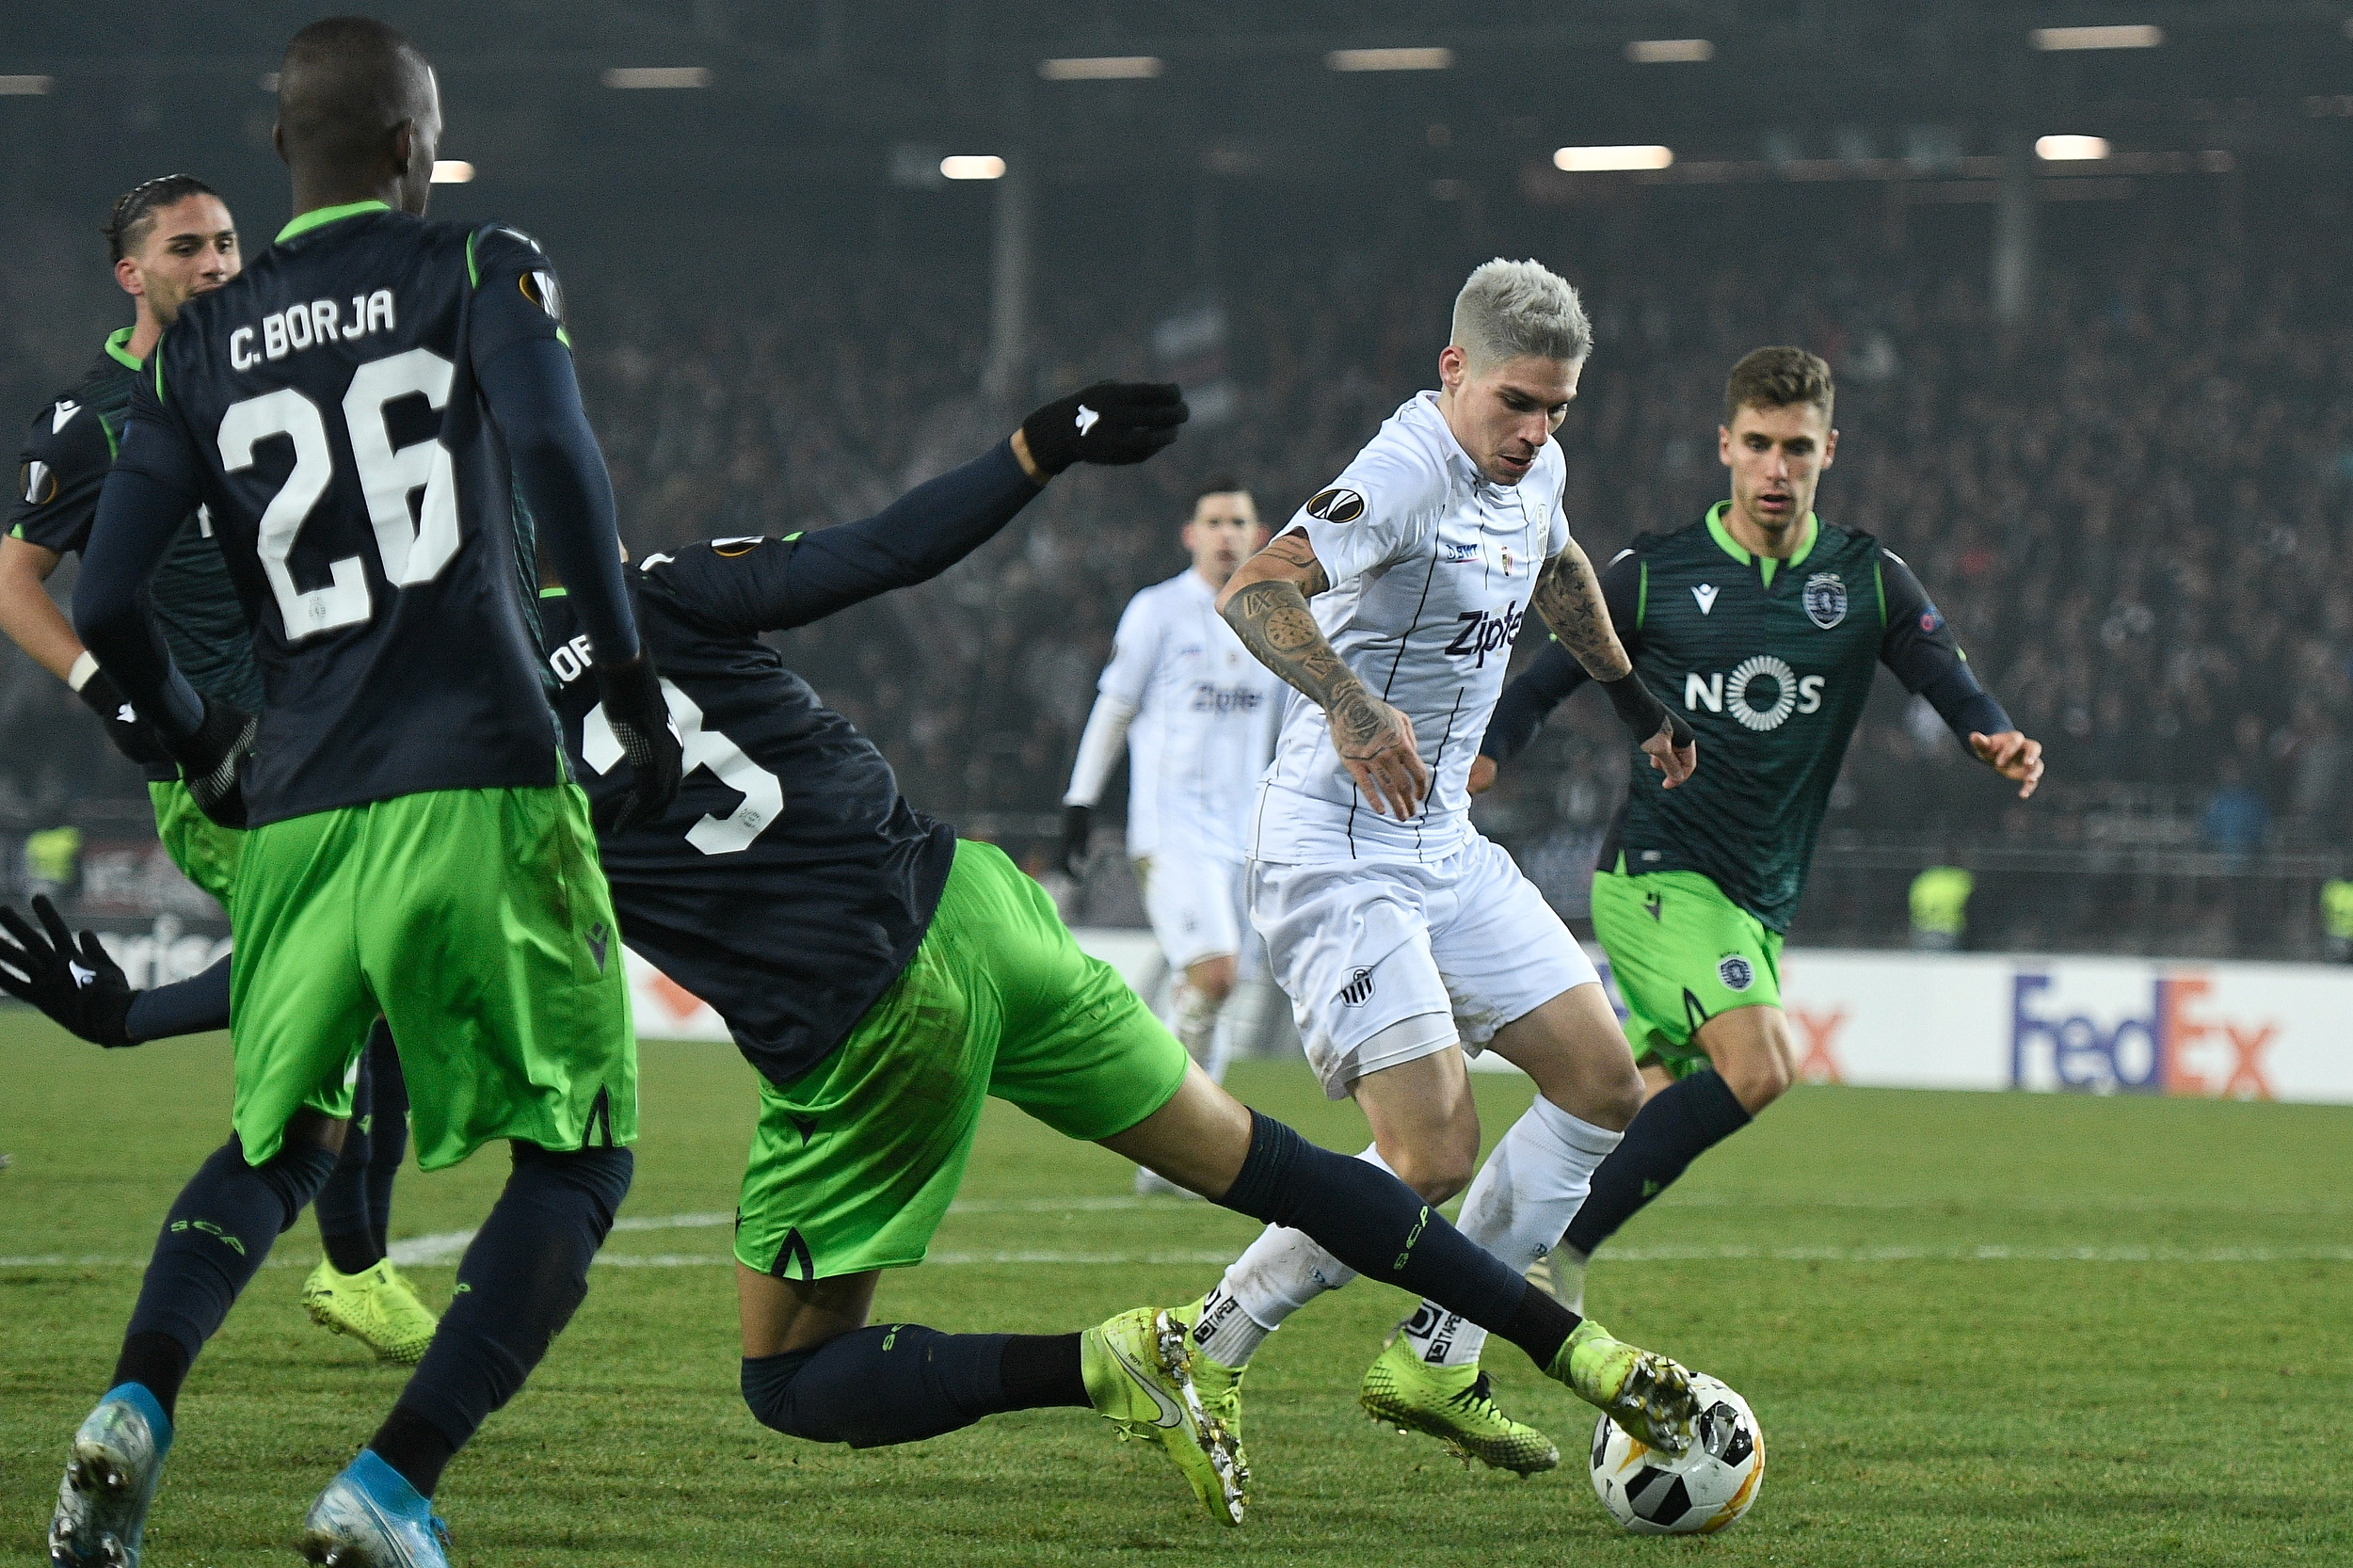 epa08066396 Sporting's Tiago Ilori (2-L) and LASK’S Dominik Frieser (R) in action during the UEFA Europa League group D soccer match between LASK Linz and Sporting CP in Linz, Austria, 12 December 2019.  EPA/CHRISTIAN BRUNA